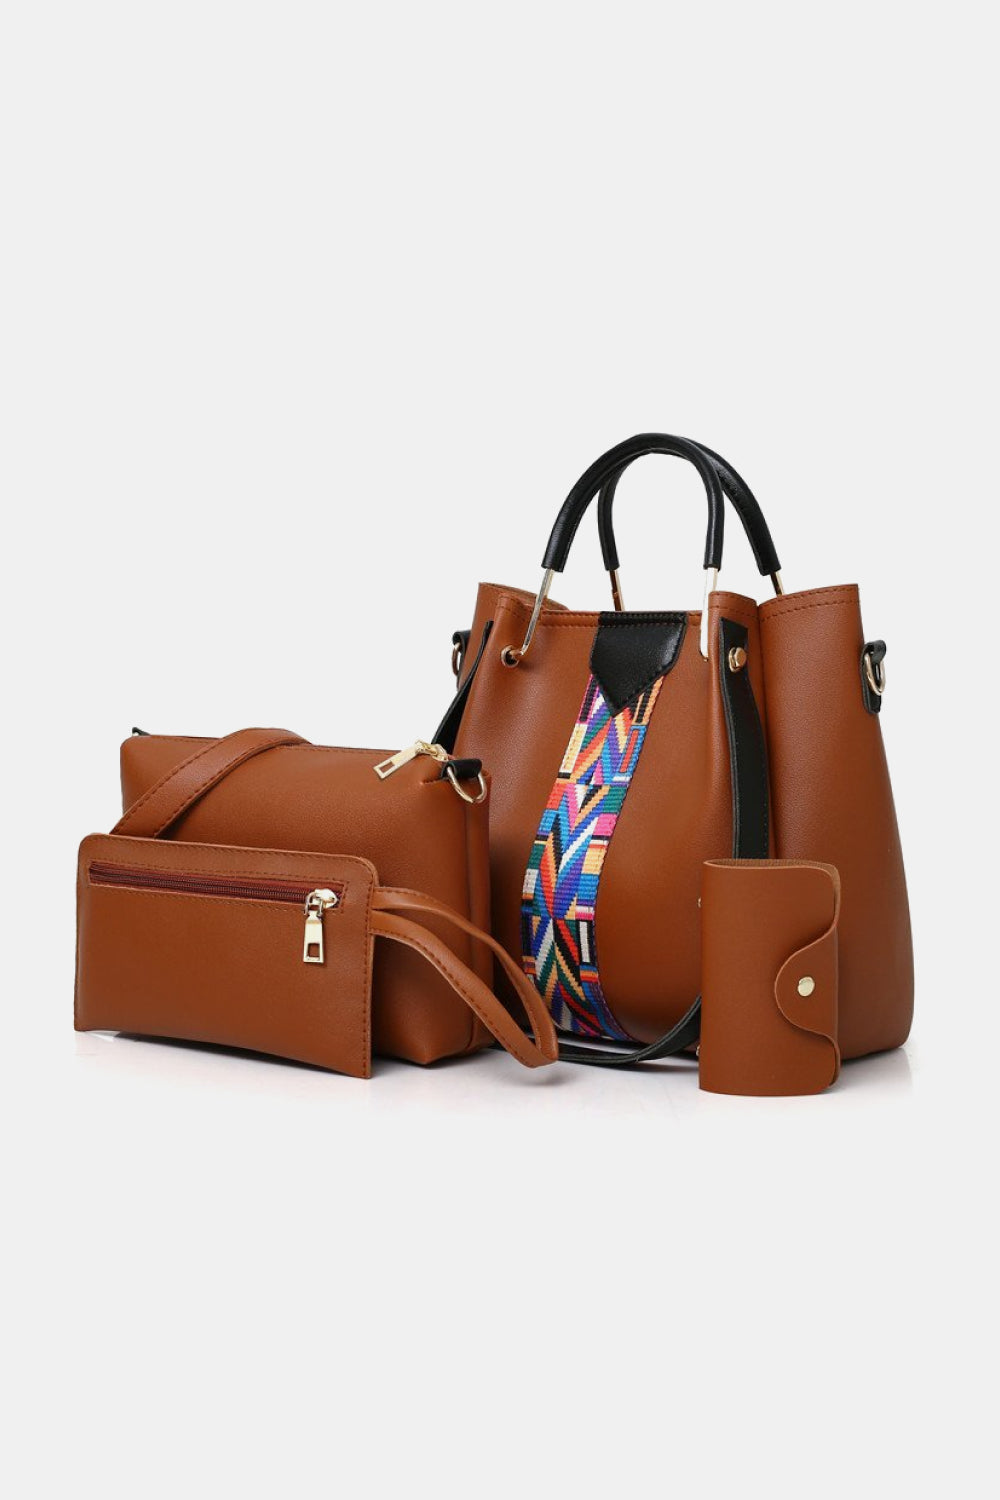 4-Piece Reconstituted Leather Leather Bag Set